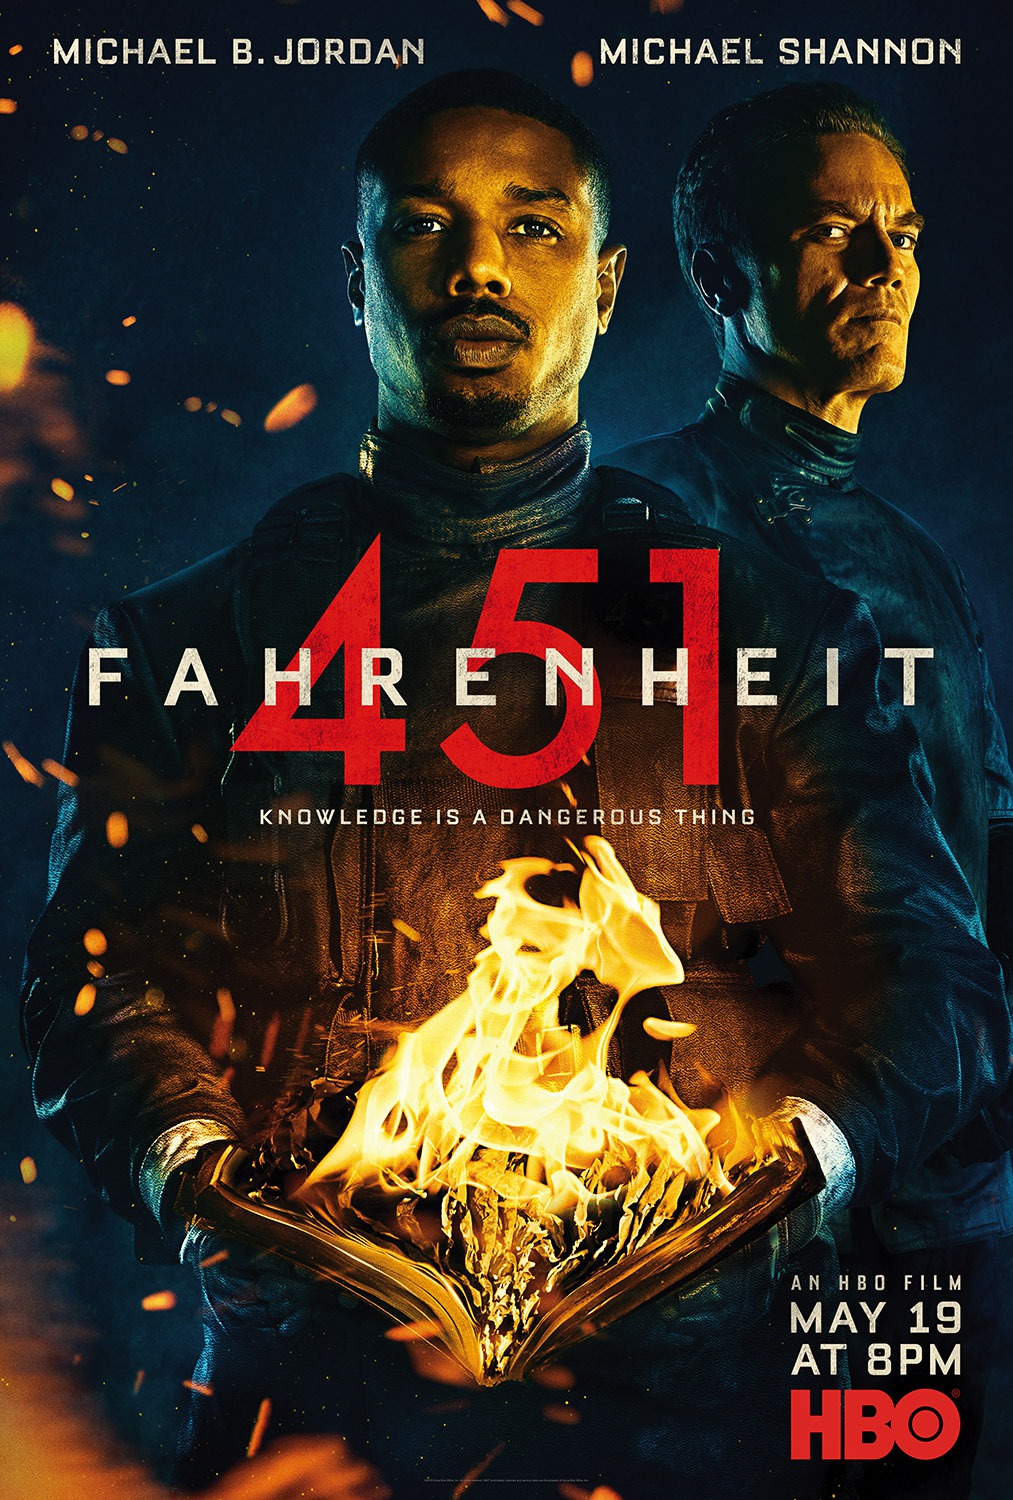 Extra Large TV Poster Image for Fahrenheit 451 